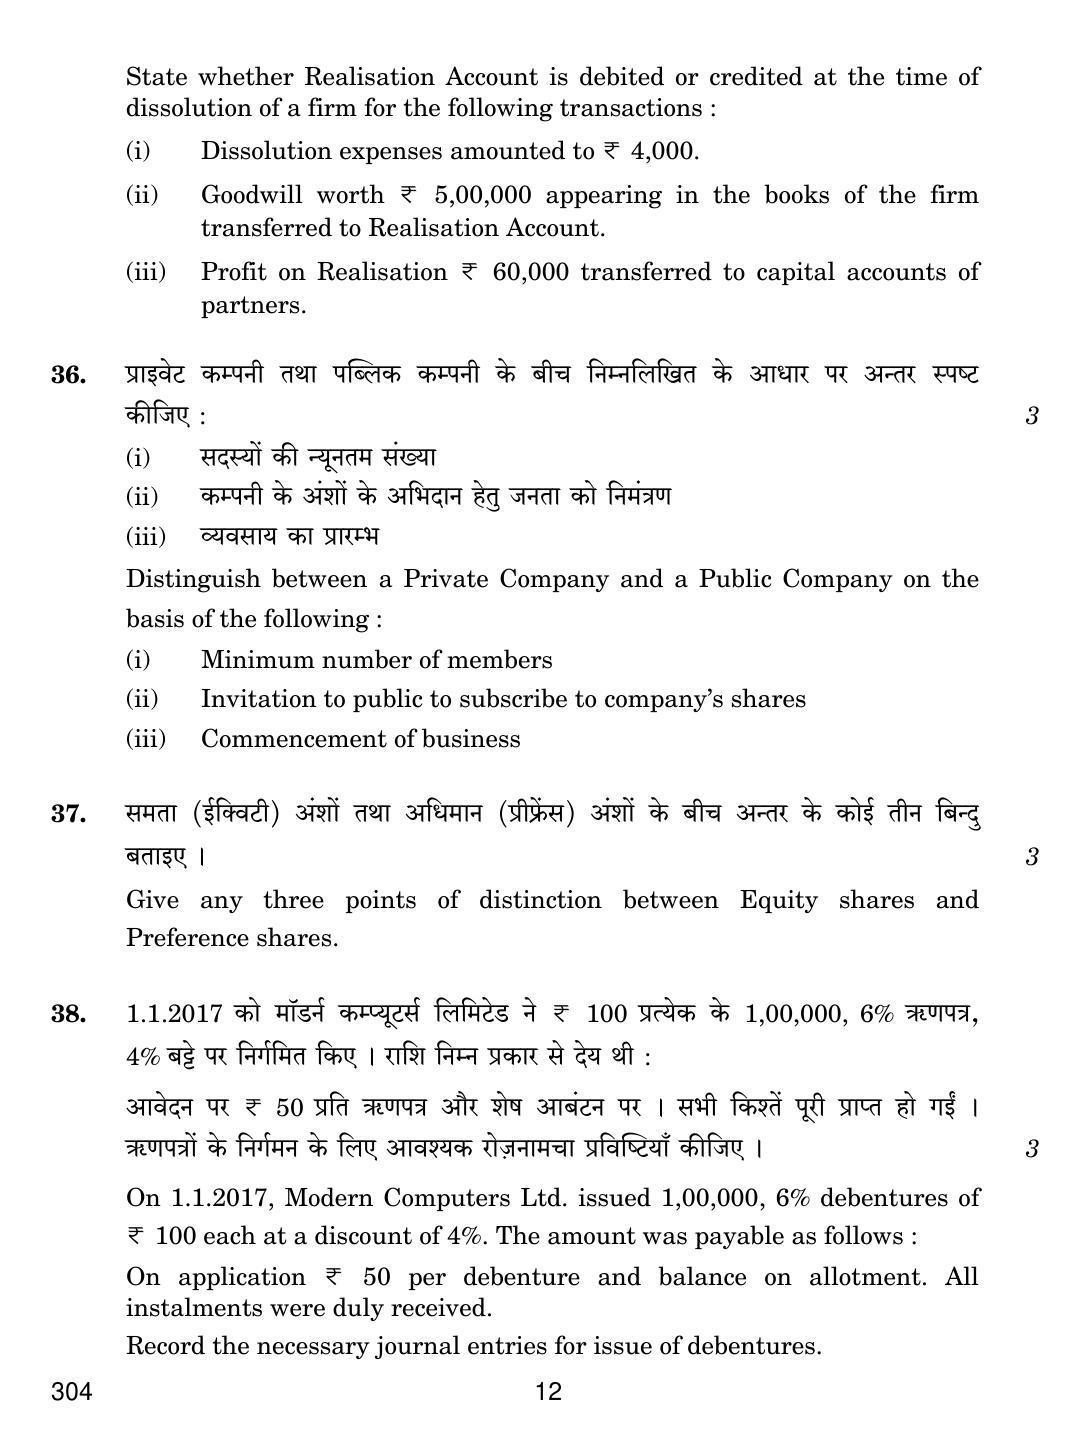 CBSE Class 12 304 FINANCIAL ACCOUNTING 2018 Question Paper - Page 12